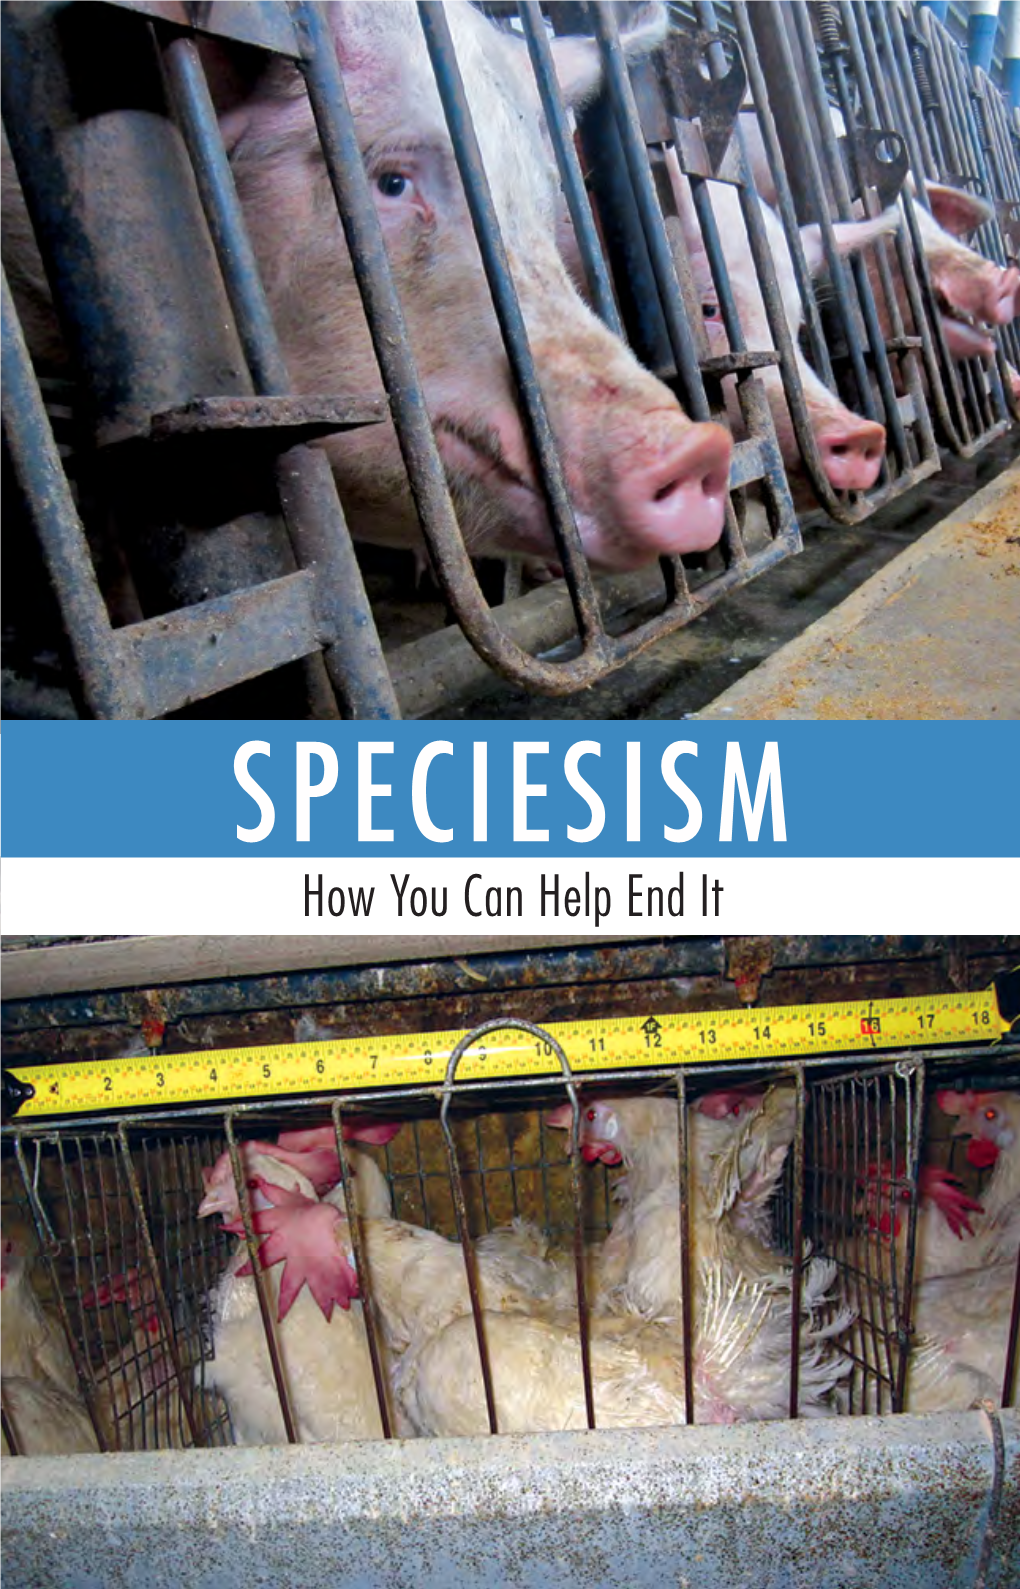 Speciesism How You Can Help End It Putting Speciesism on Our Radar